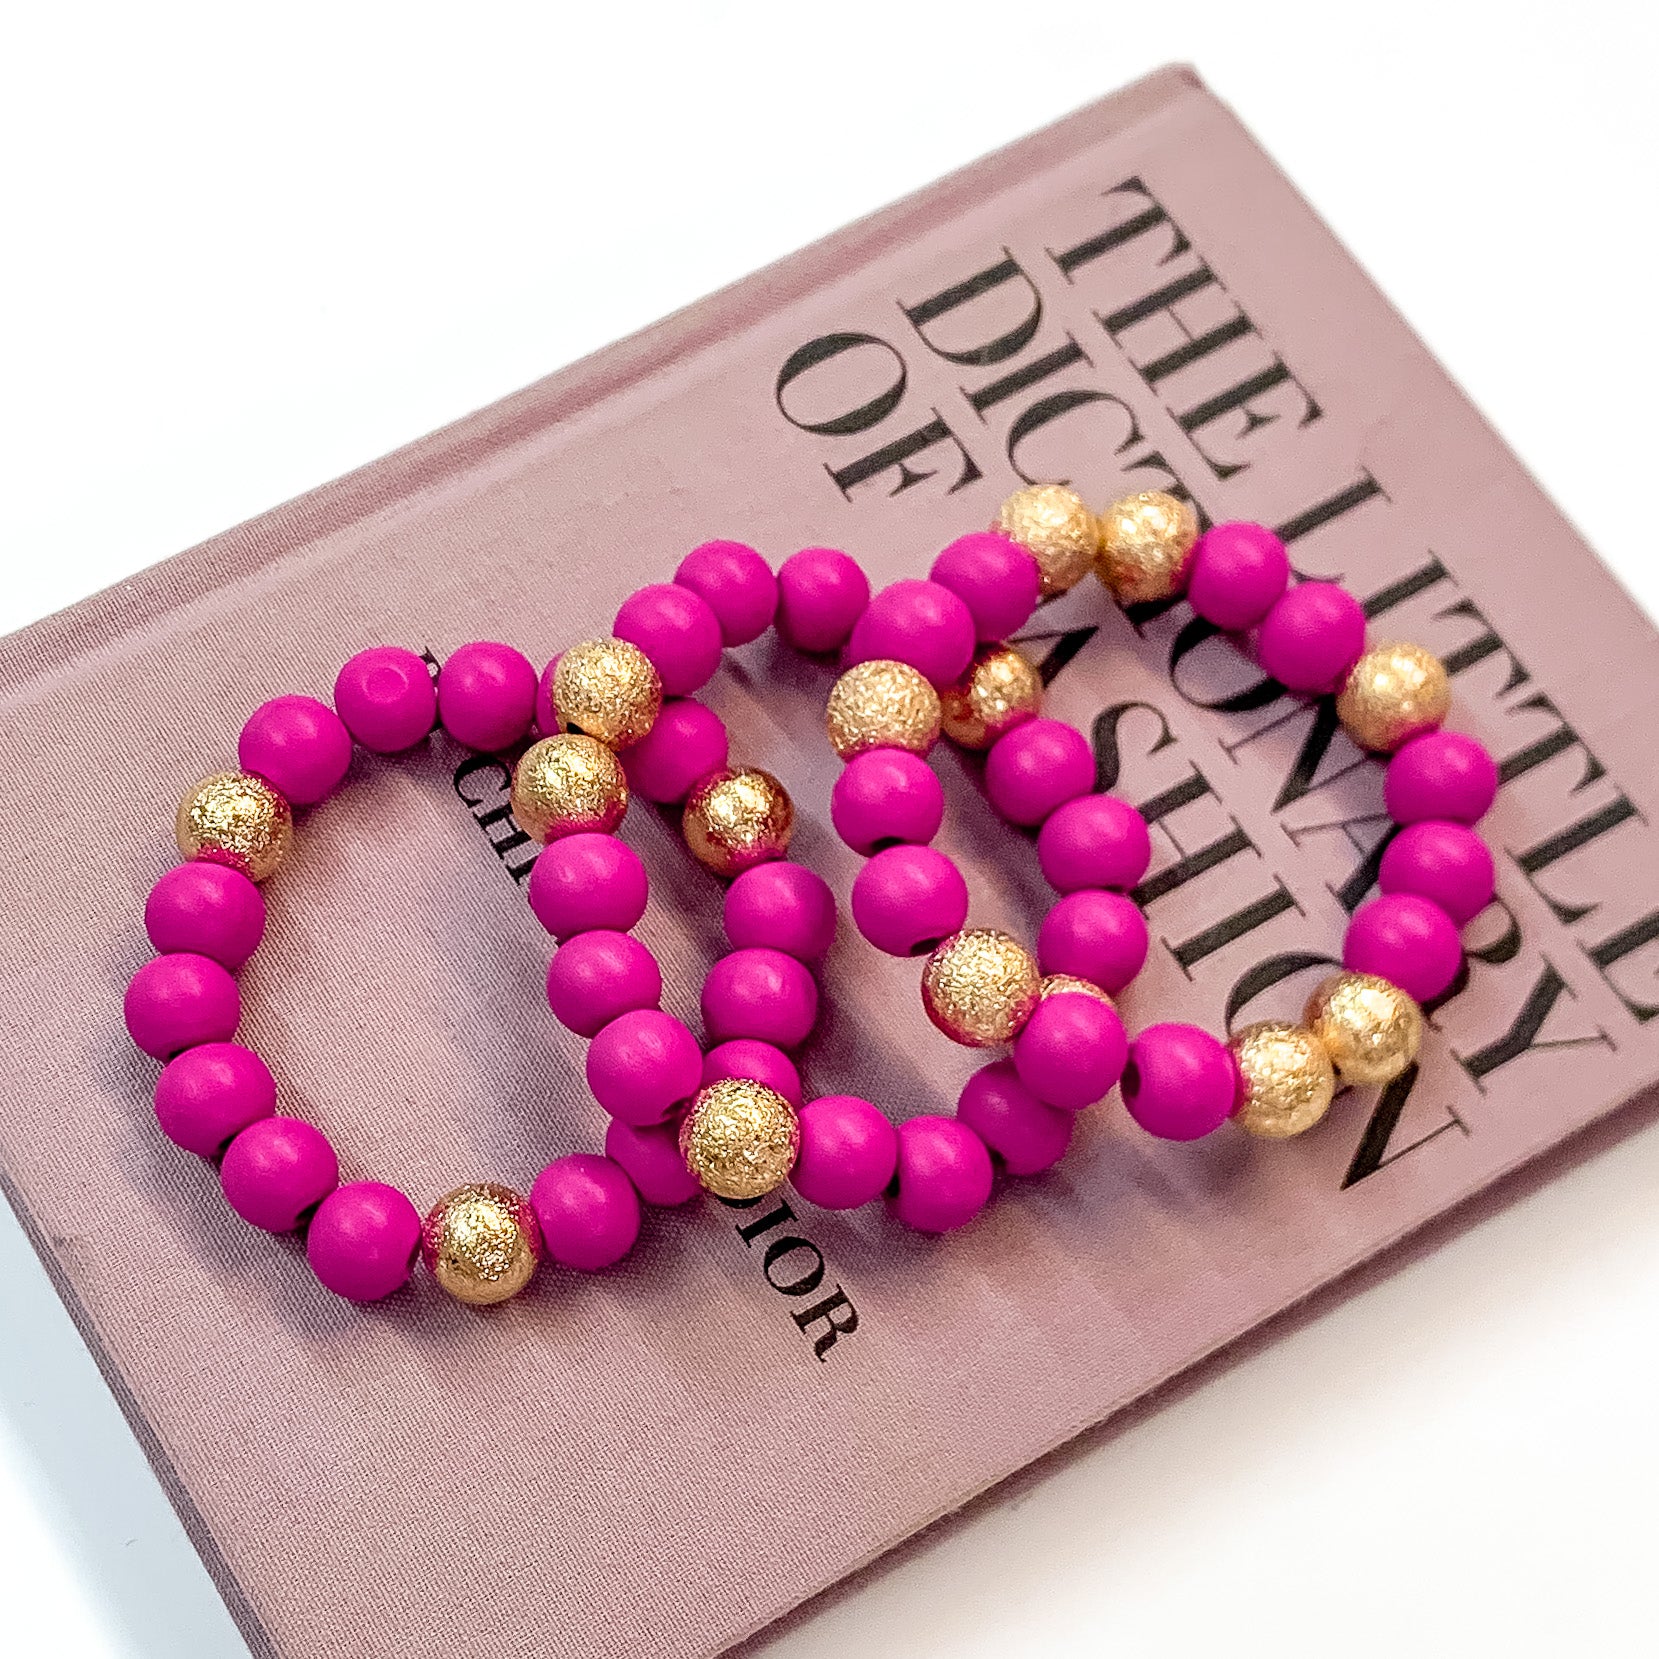 Pictured on a mauve colored book is a set of fuchsia purple beaded bracelets with gold beaded spacers.